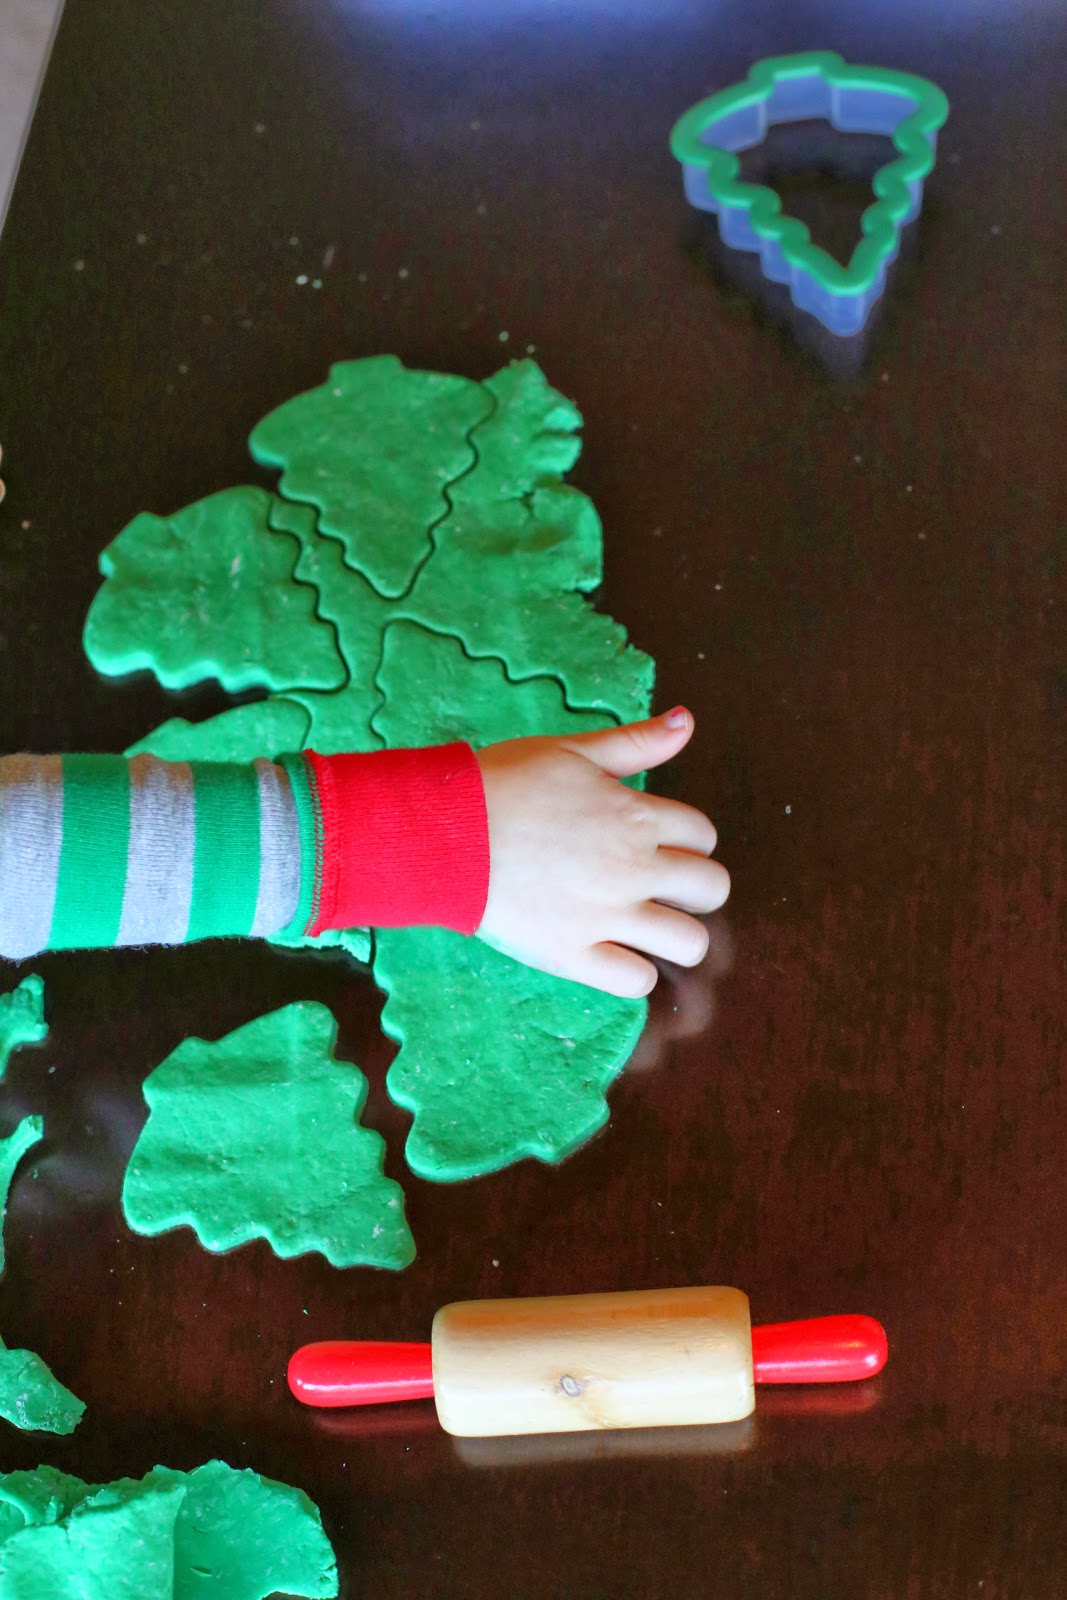 A recipe for vibrantly colored ornaments made of bread clay - you probably have everything you need to make these right now!  From Fun at Home with Kids